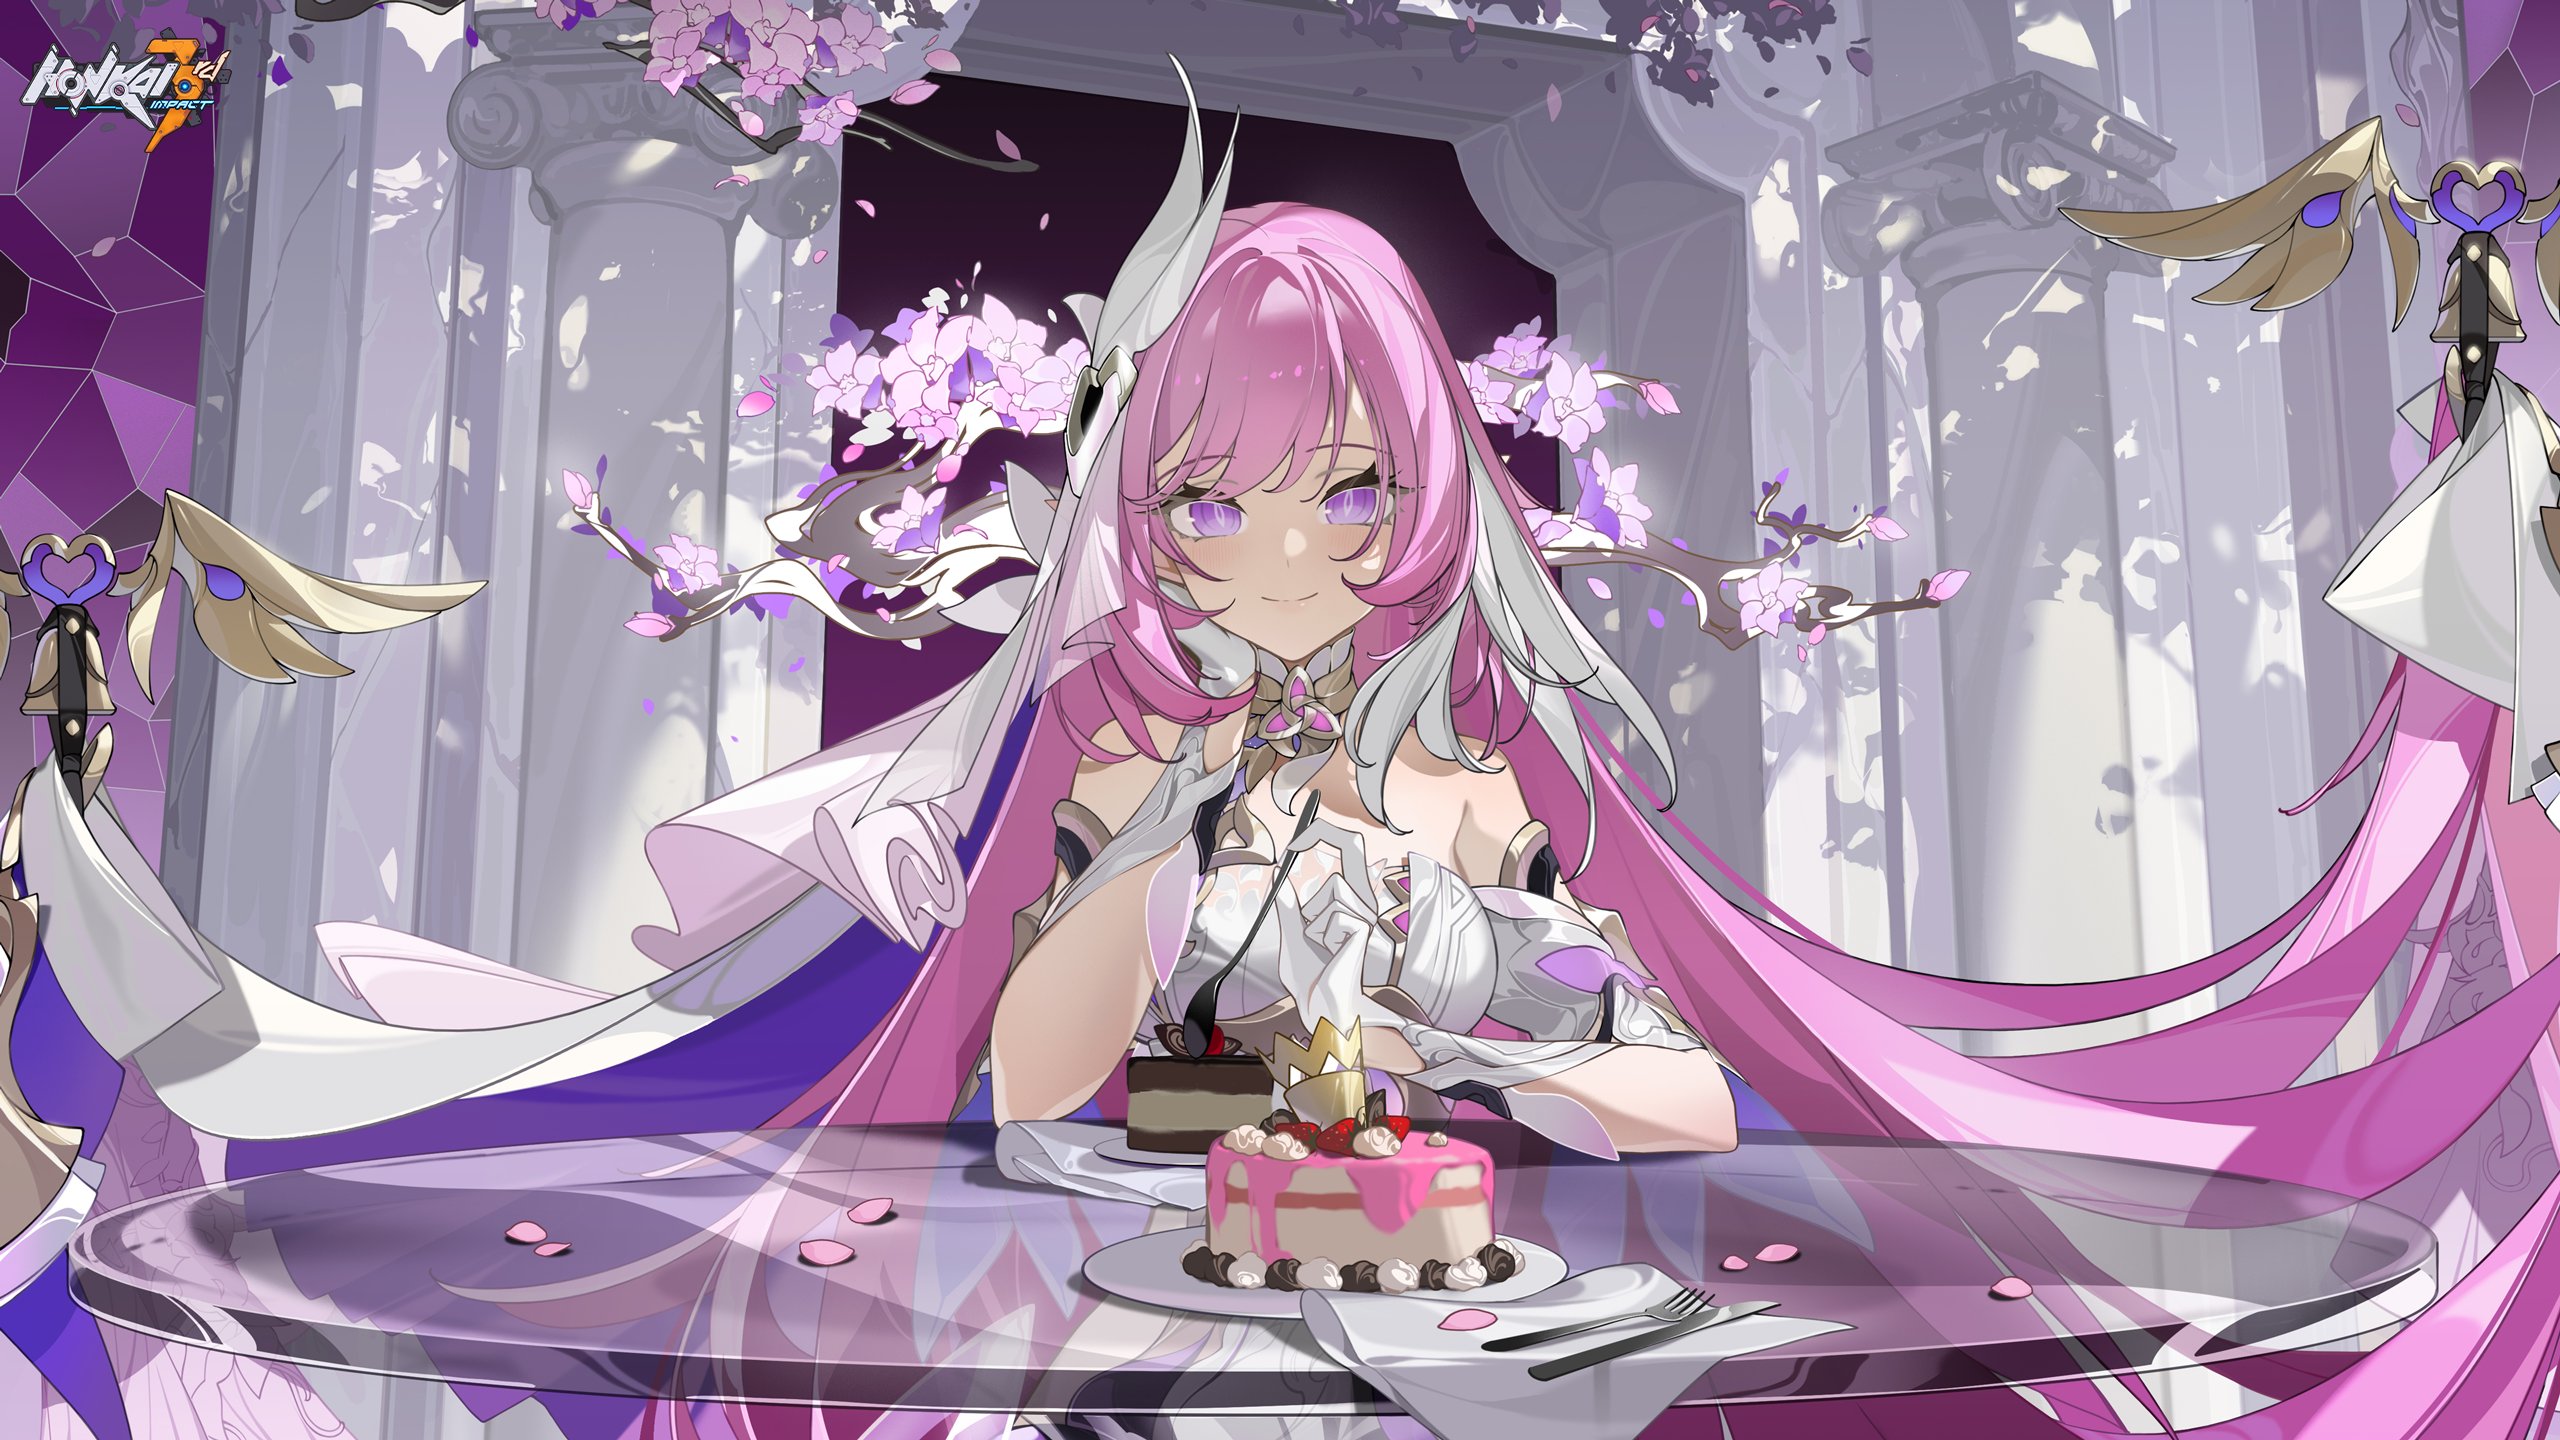 Honkai Impact 3rd - [Wallpaper] Elysia's Sweet Afternoon Tea Wallpaper Download Thanks for your invitation! This is a beautiful place and it perfectly matches my outfit. We hope you love Elysia's